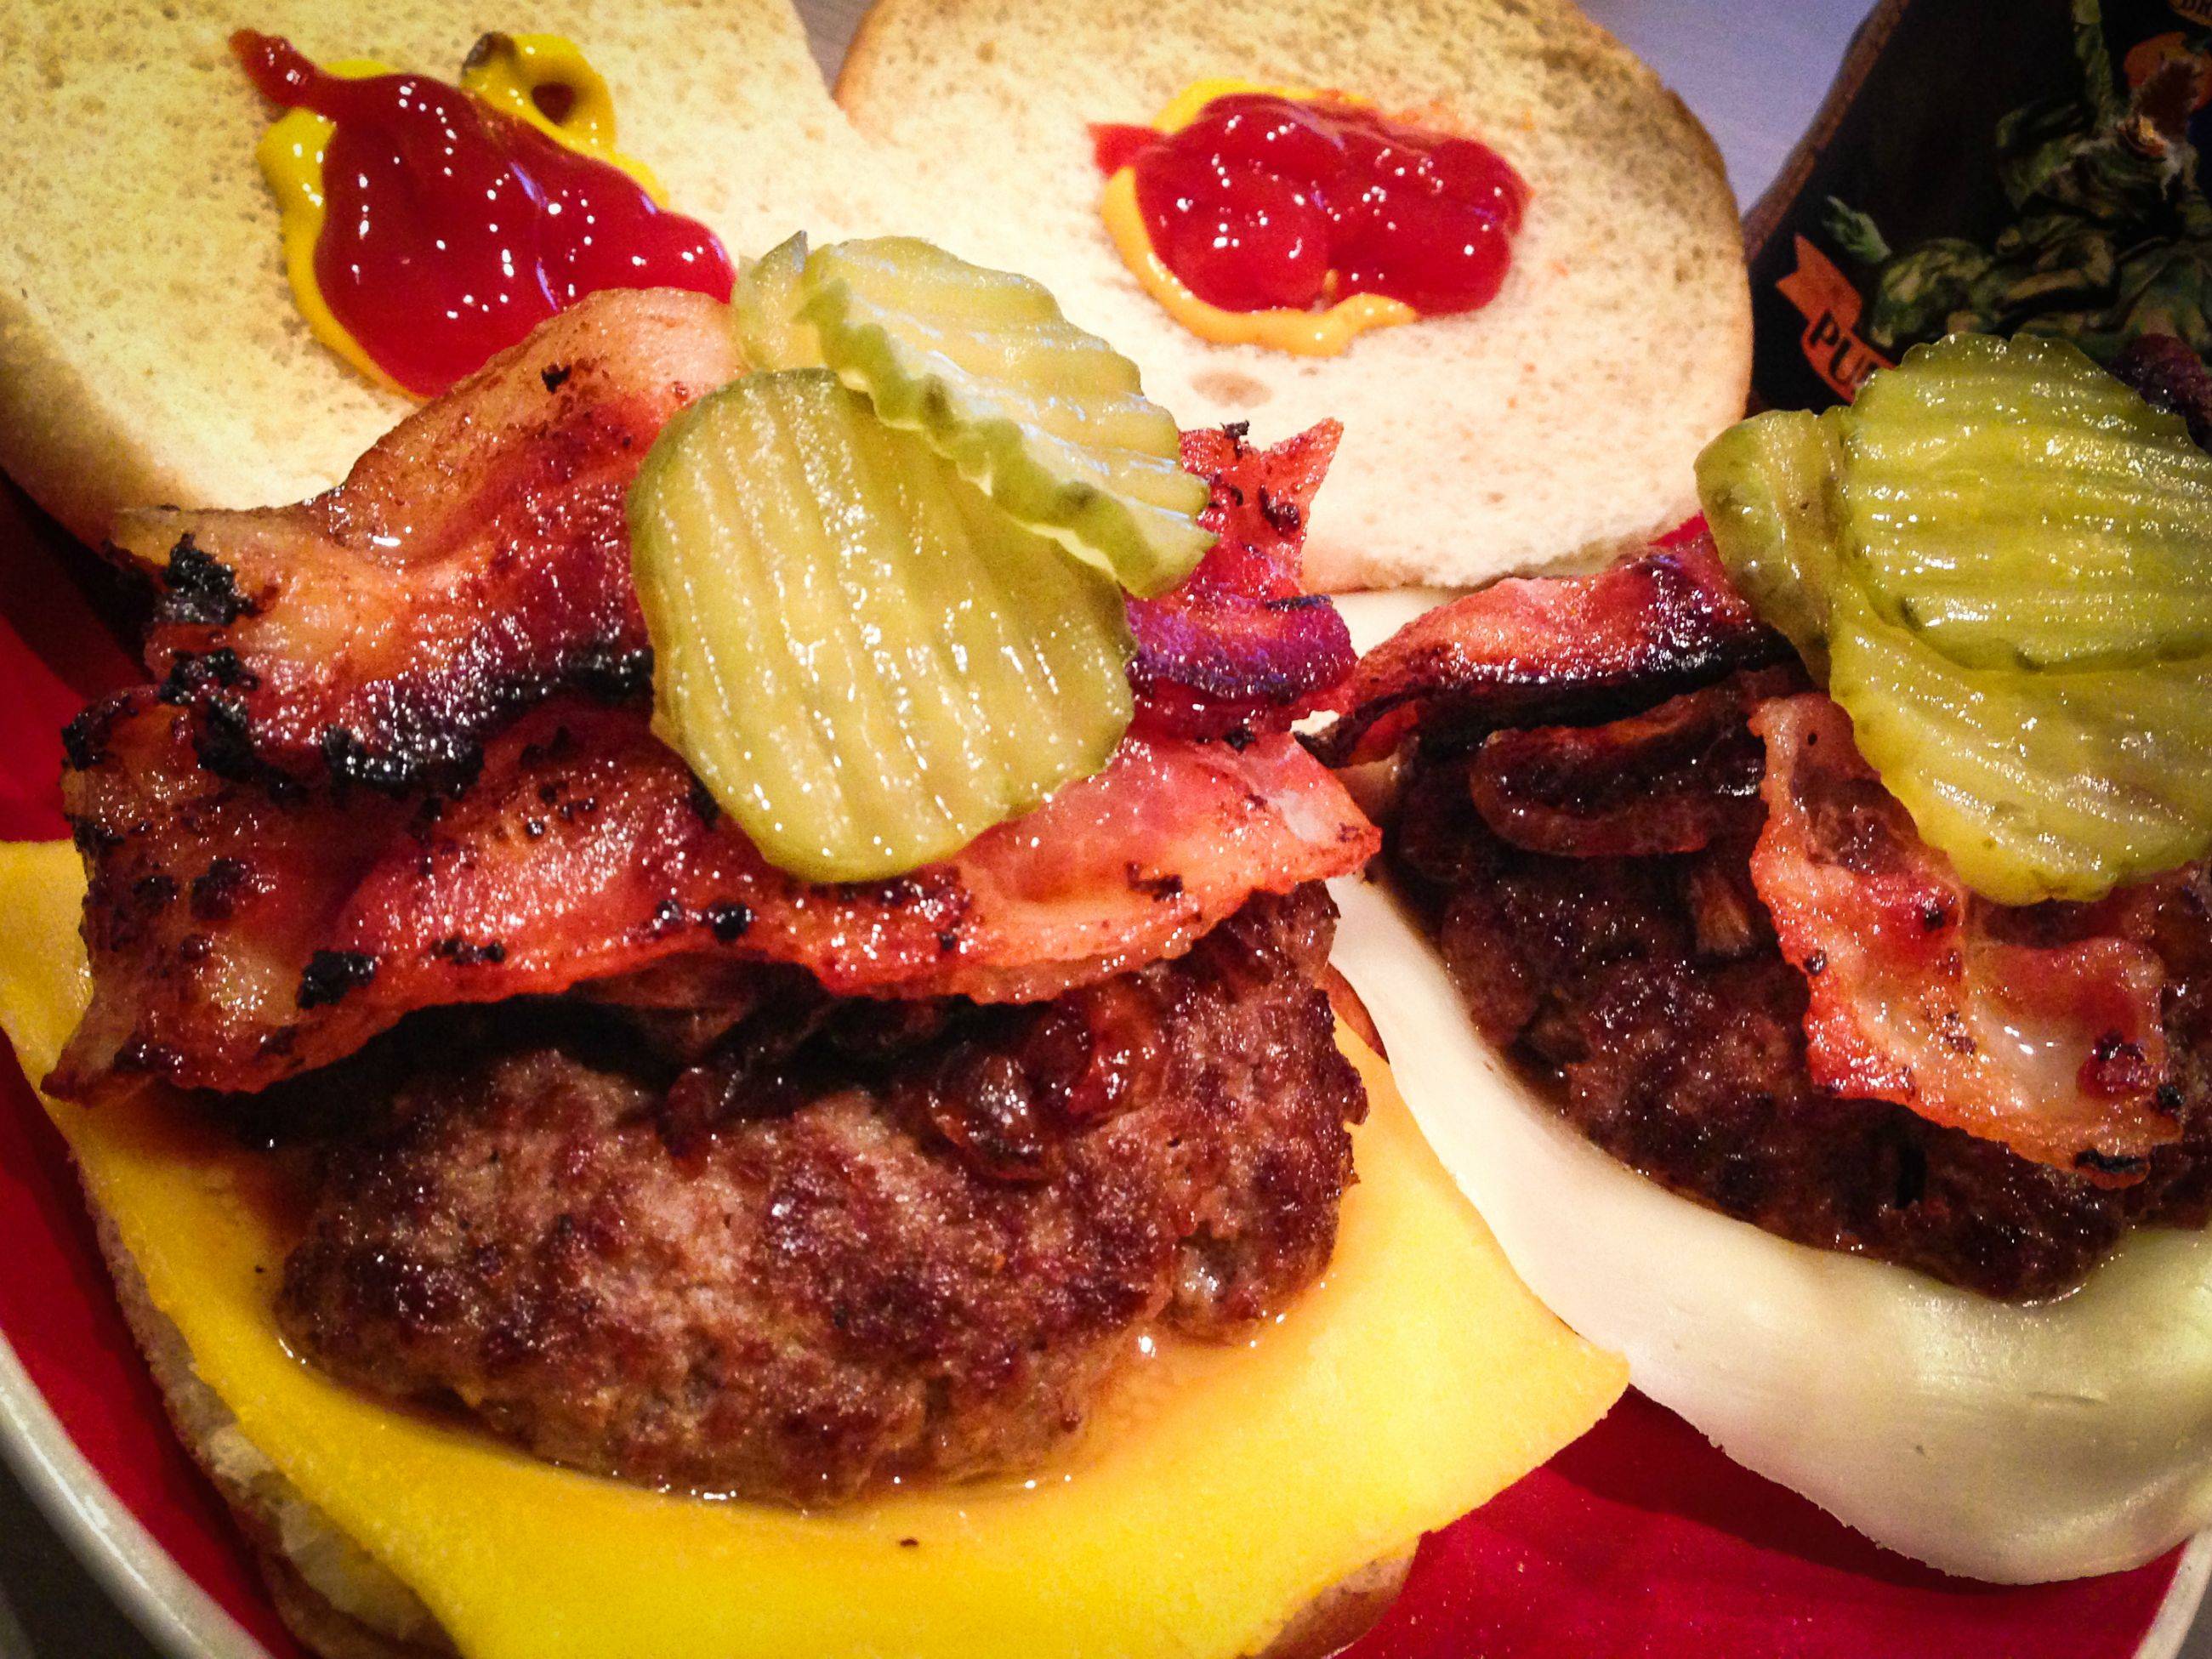 Mini Cheeseburgers, 1 American, 1 Provolone, with caramelized onions, maple bacon and pickles.